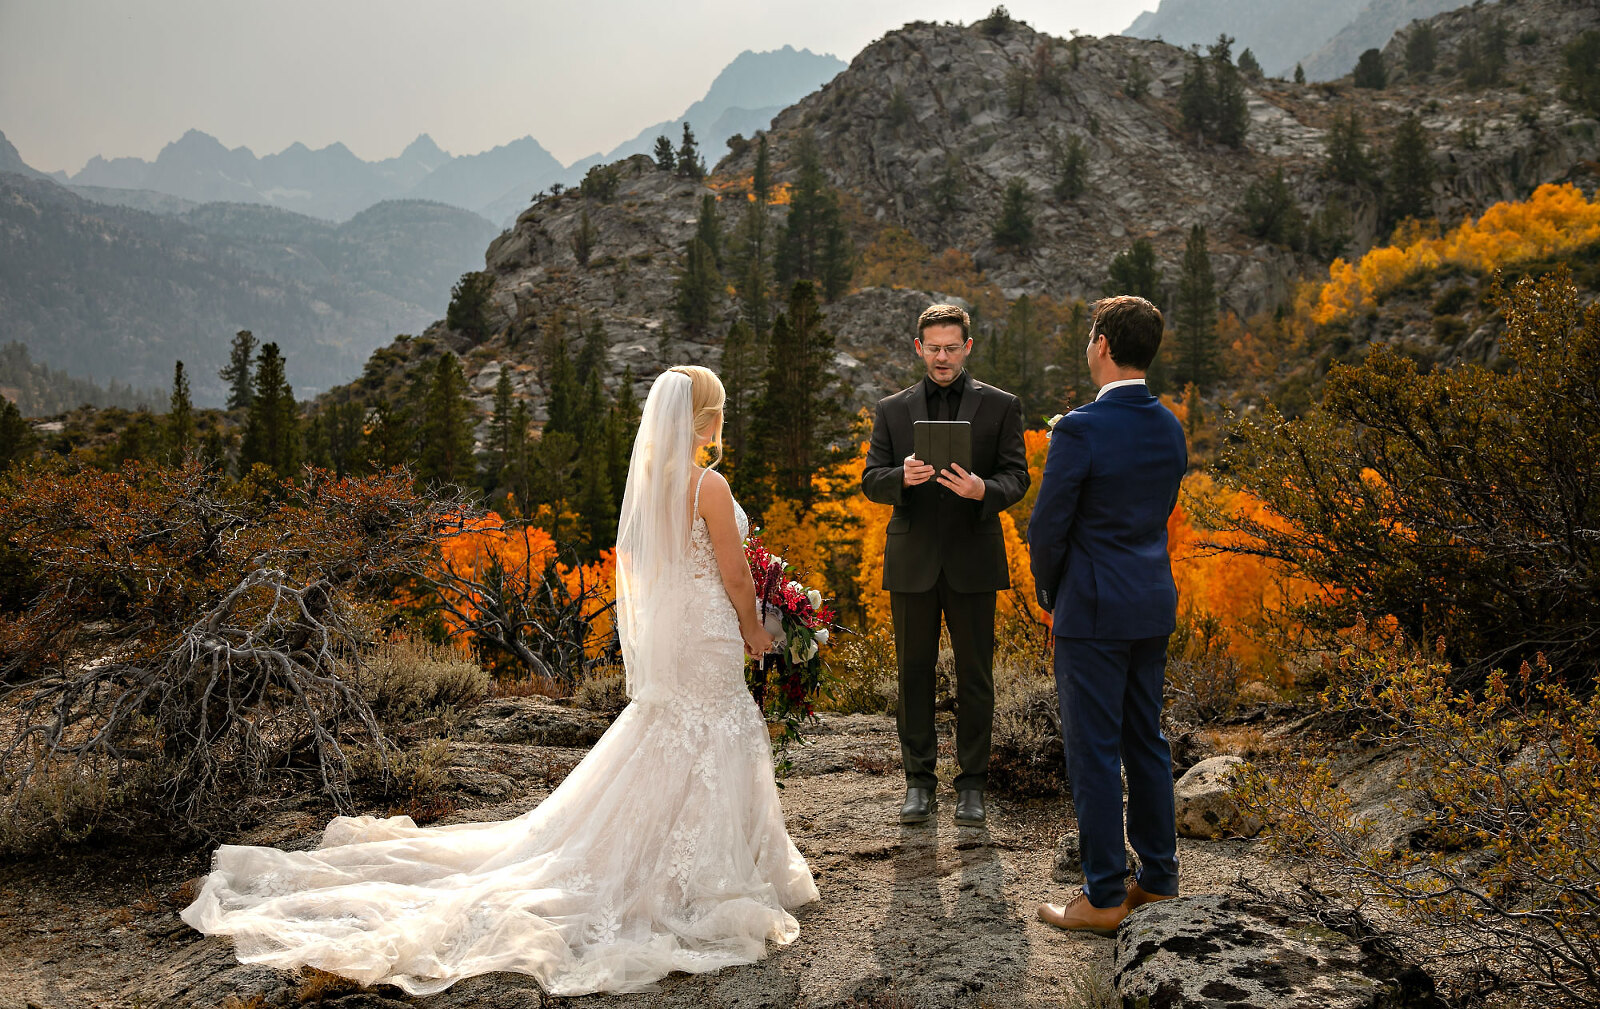 Mountain lake wedding ceremony during fall color